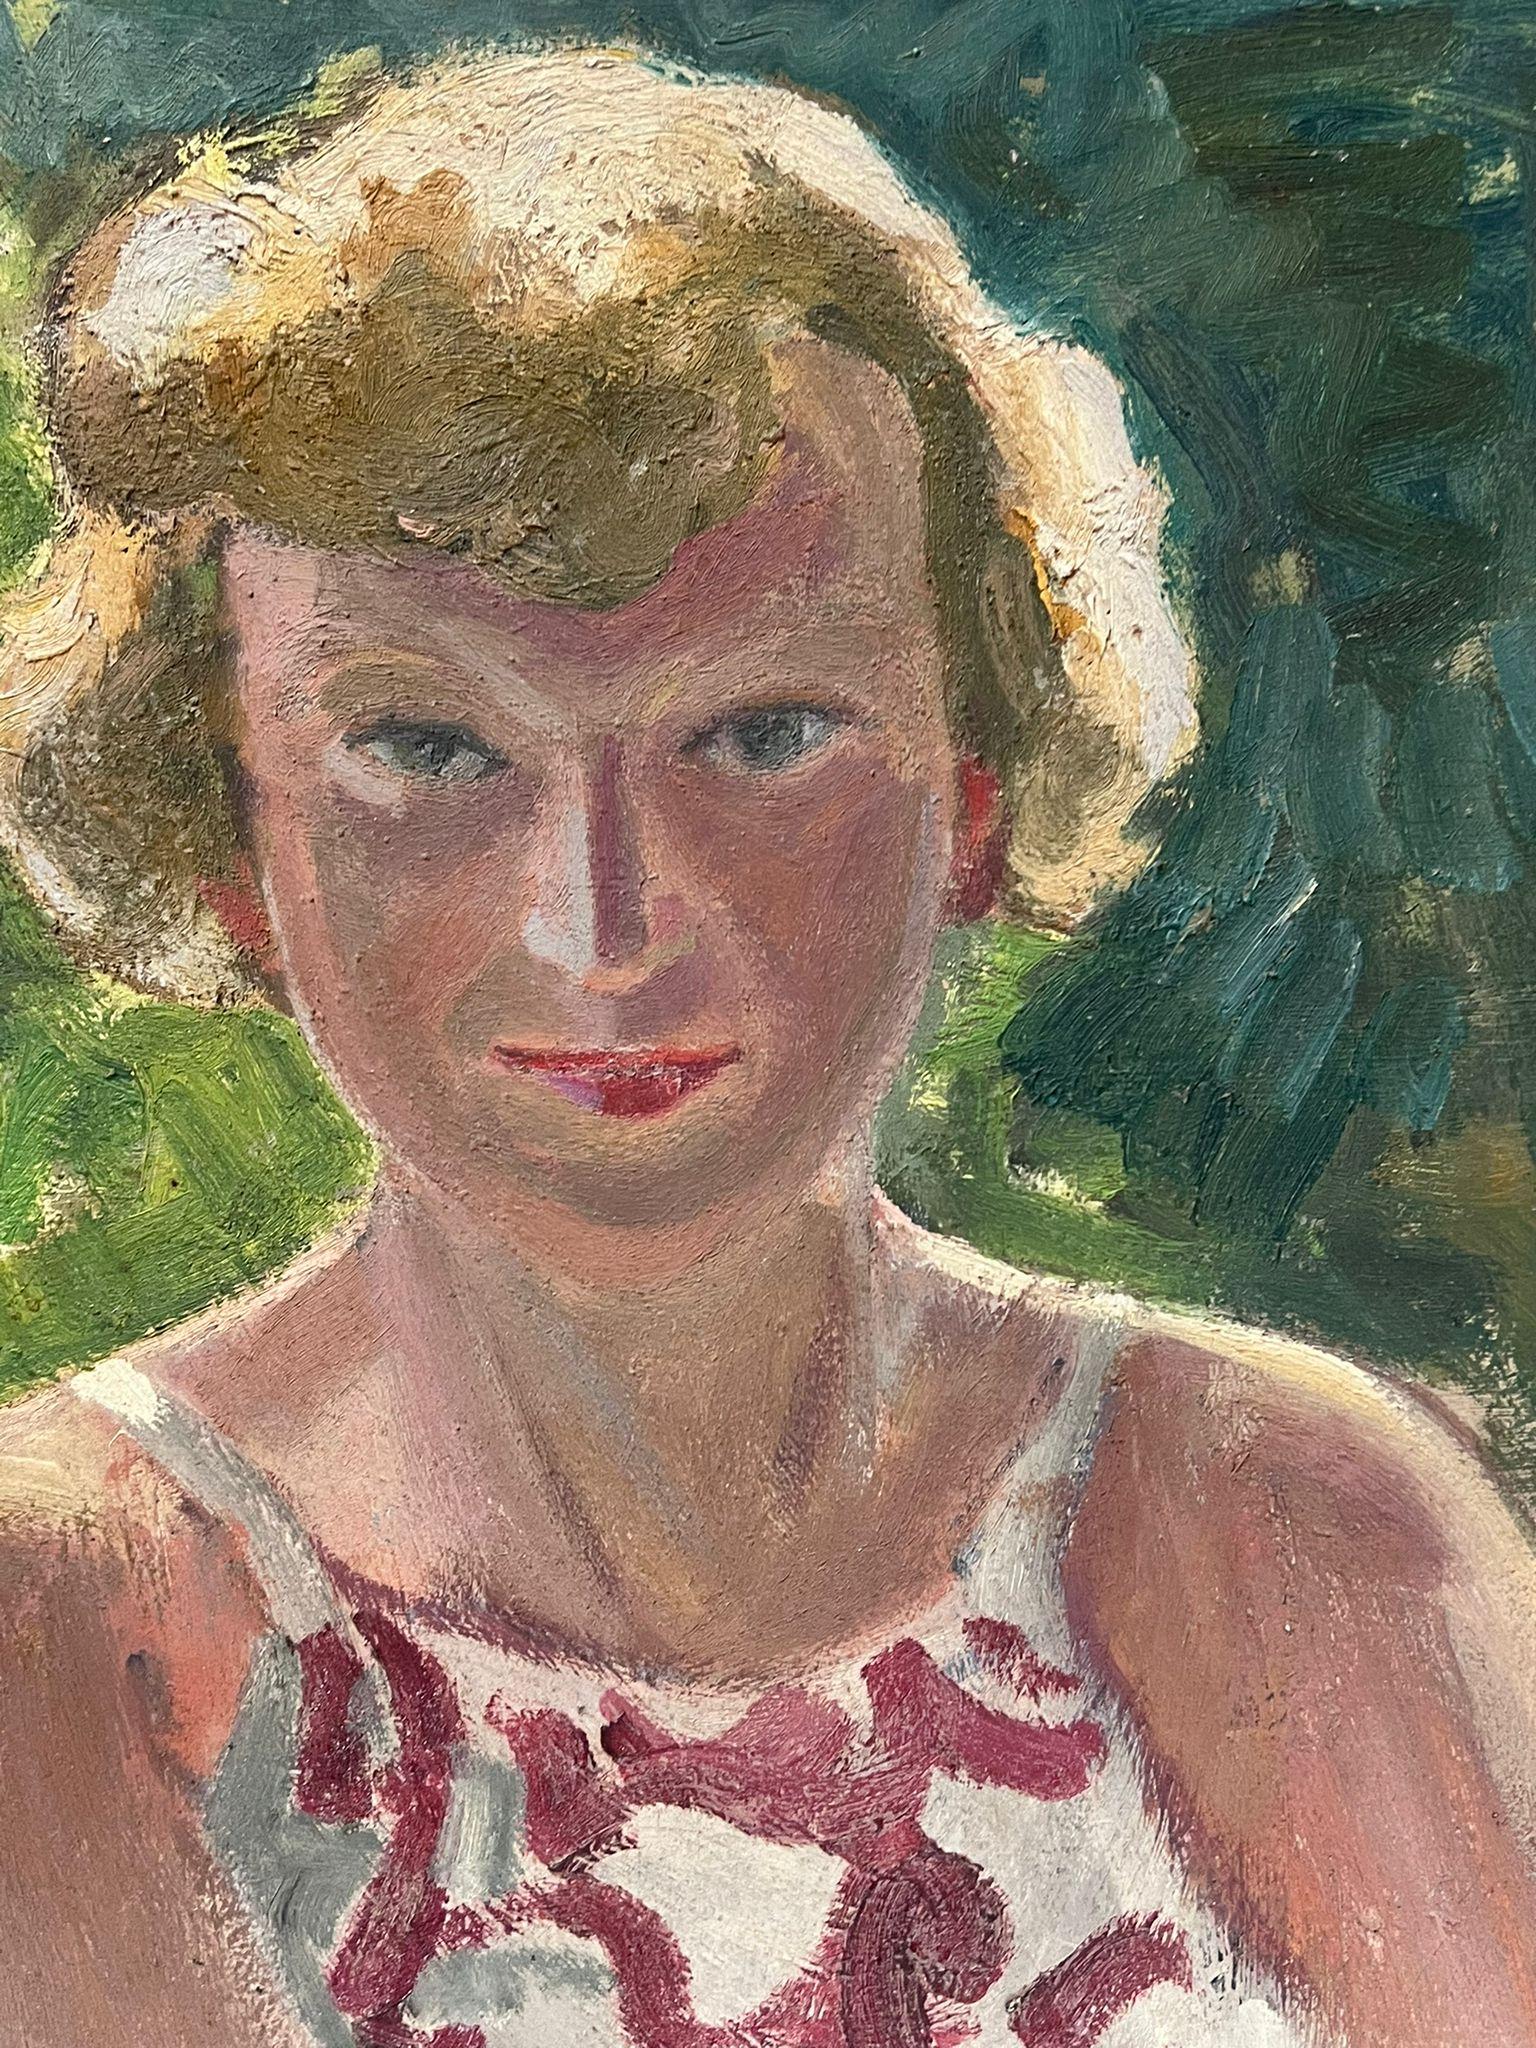 French Portrait
by Y. Blanchon, French 1950's Impressionist 
oil on board, unframed
painting: 18 x 15 inches
provenance: from a large private collection of this artists work in Northern France
condition: original, good and sound condition 